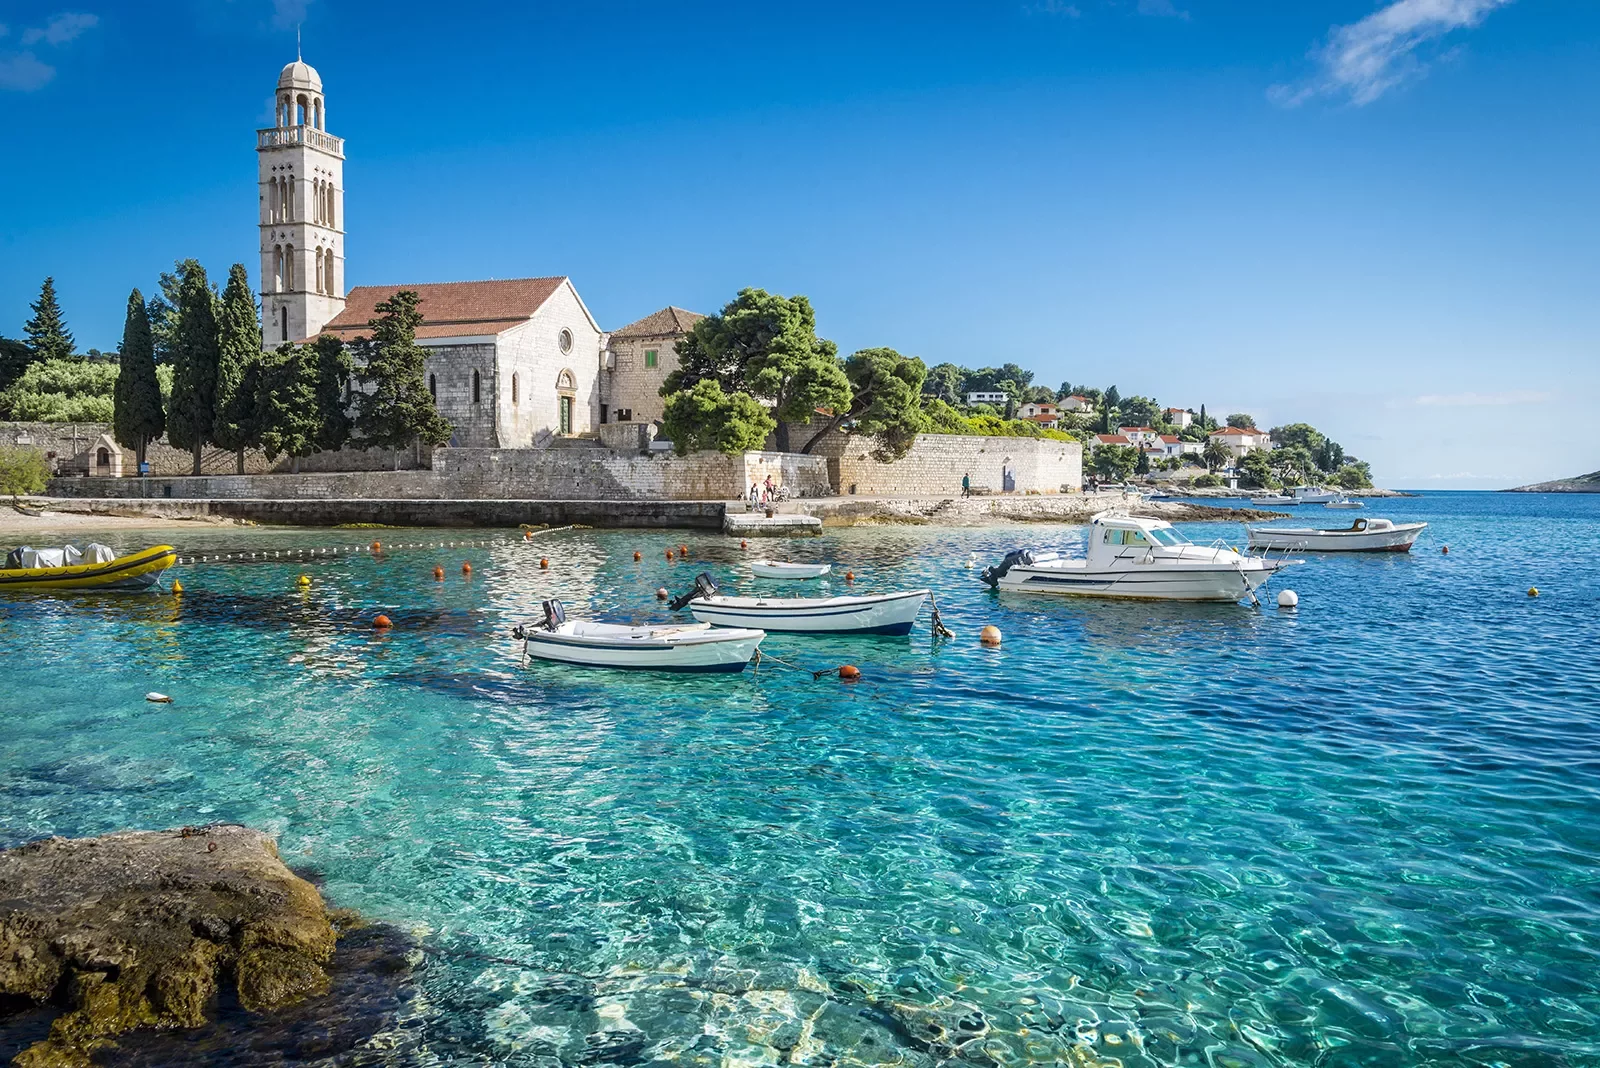 Wide shot of Hvar Island, white stone buildings, blue water, boats.